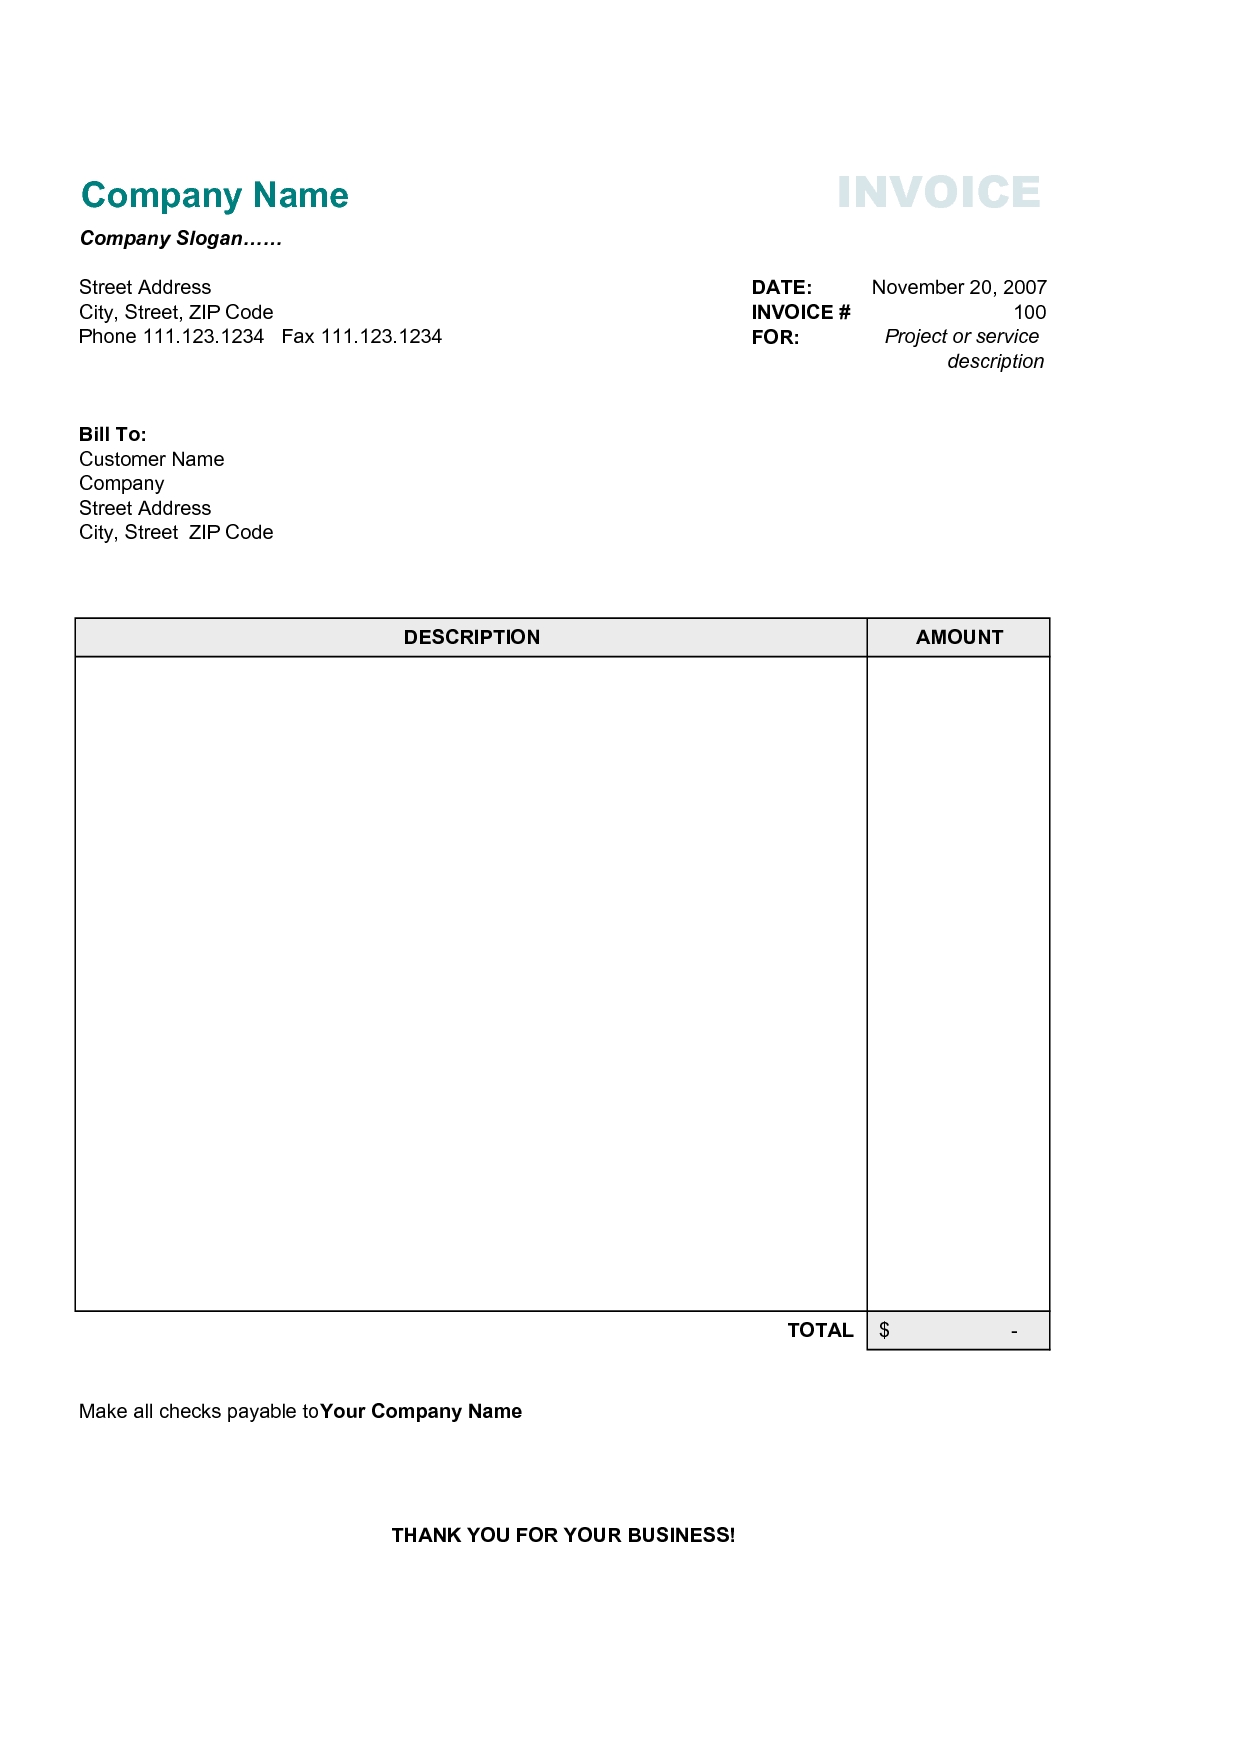 Invoice Template for Word Free Basic Invoice